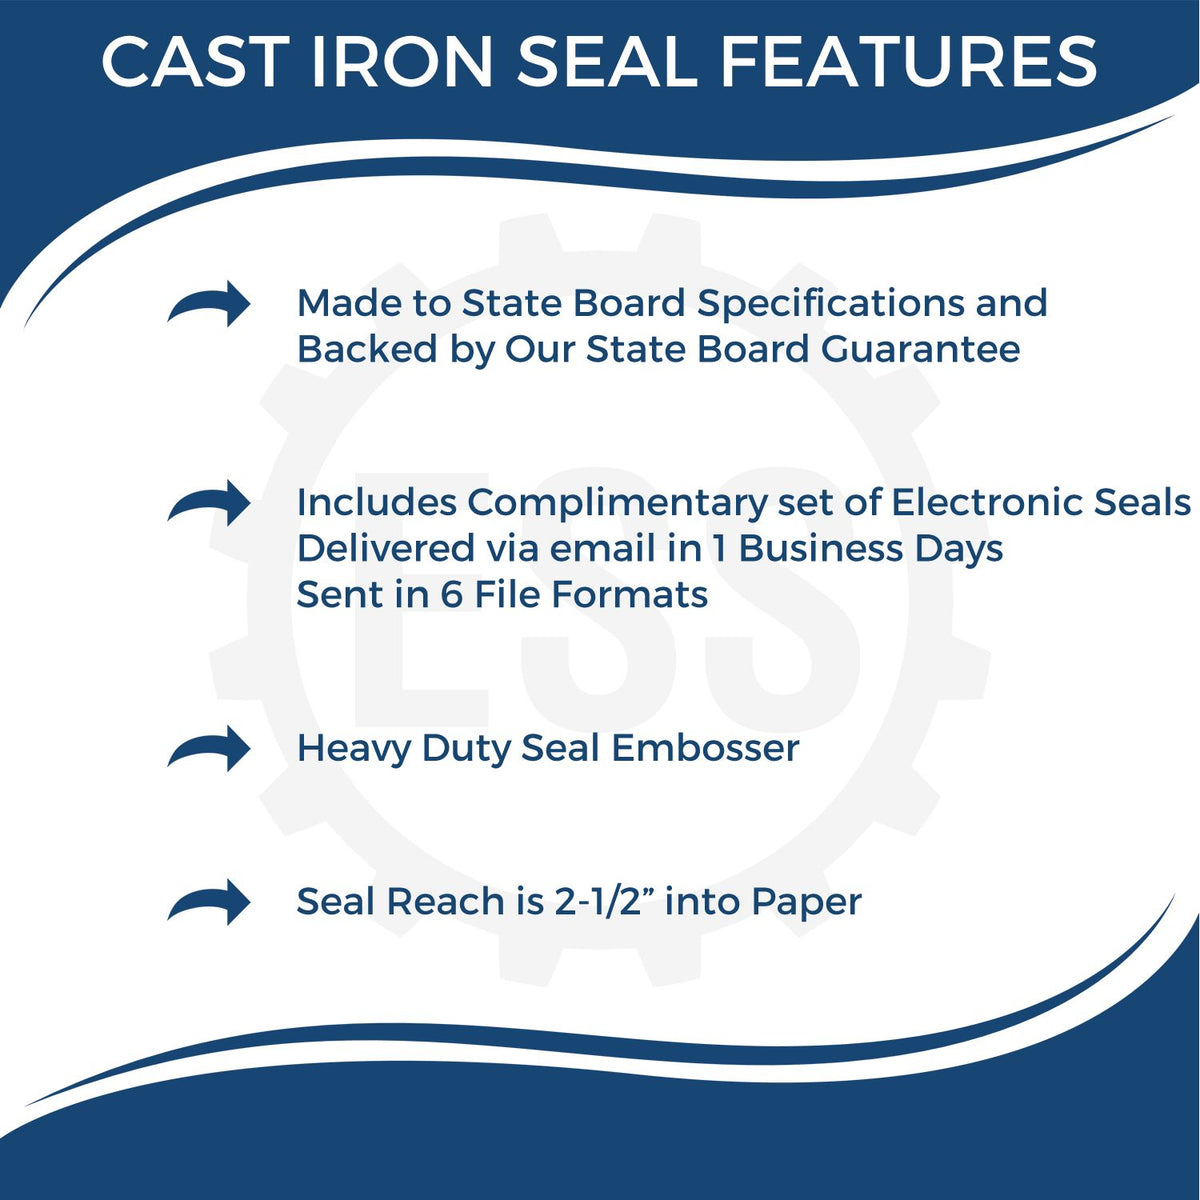 A picture of an infographic highlighting the selling points for the Heavy Duty Cast Iron Louisiana Architect Embosser